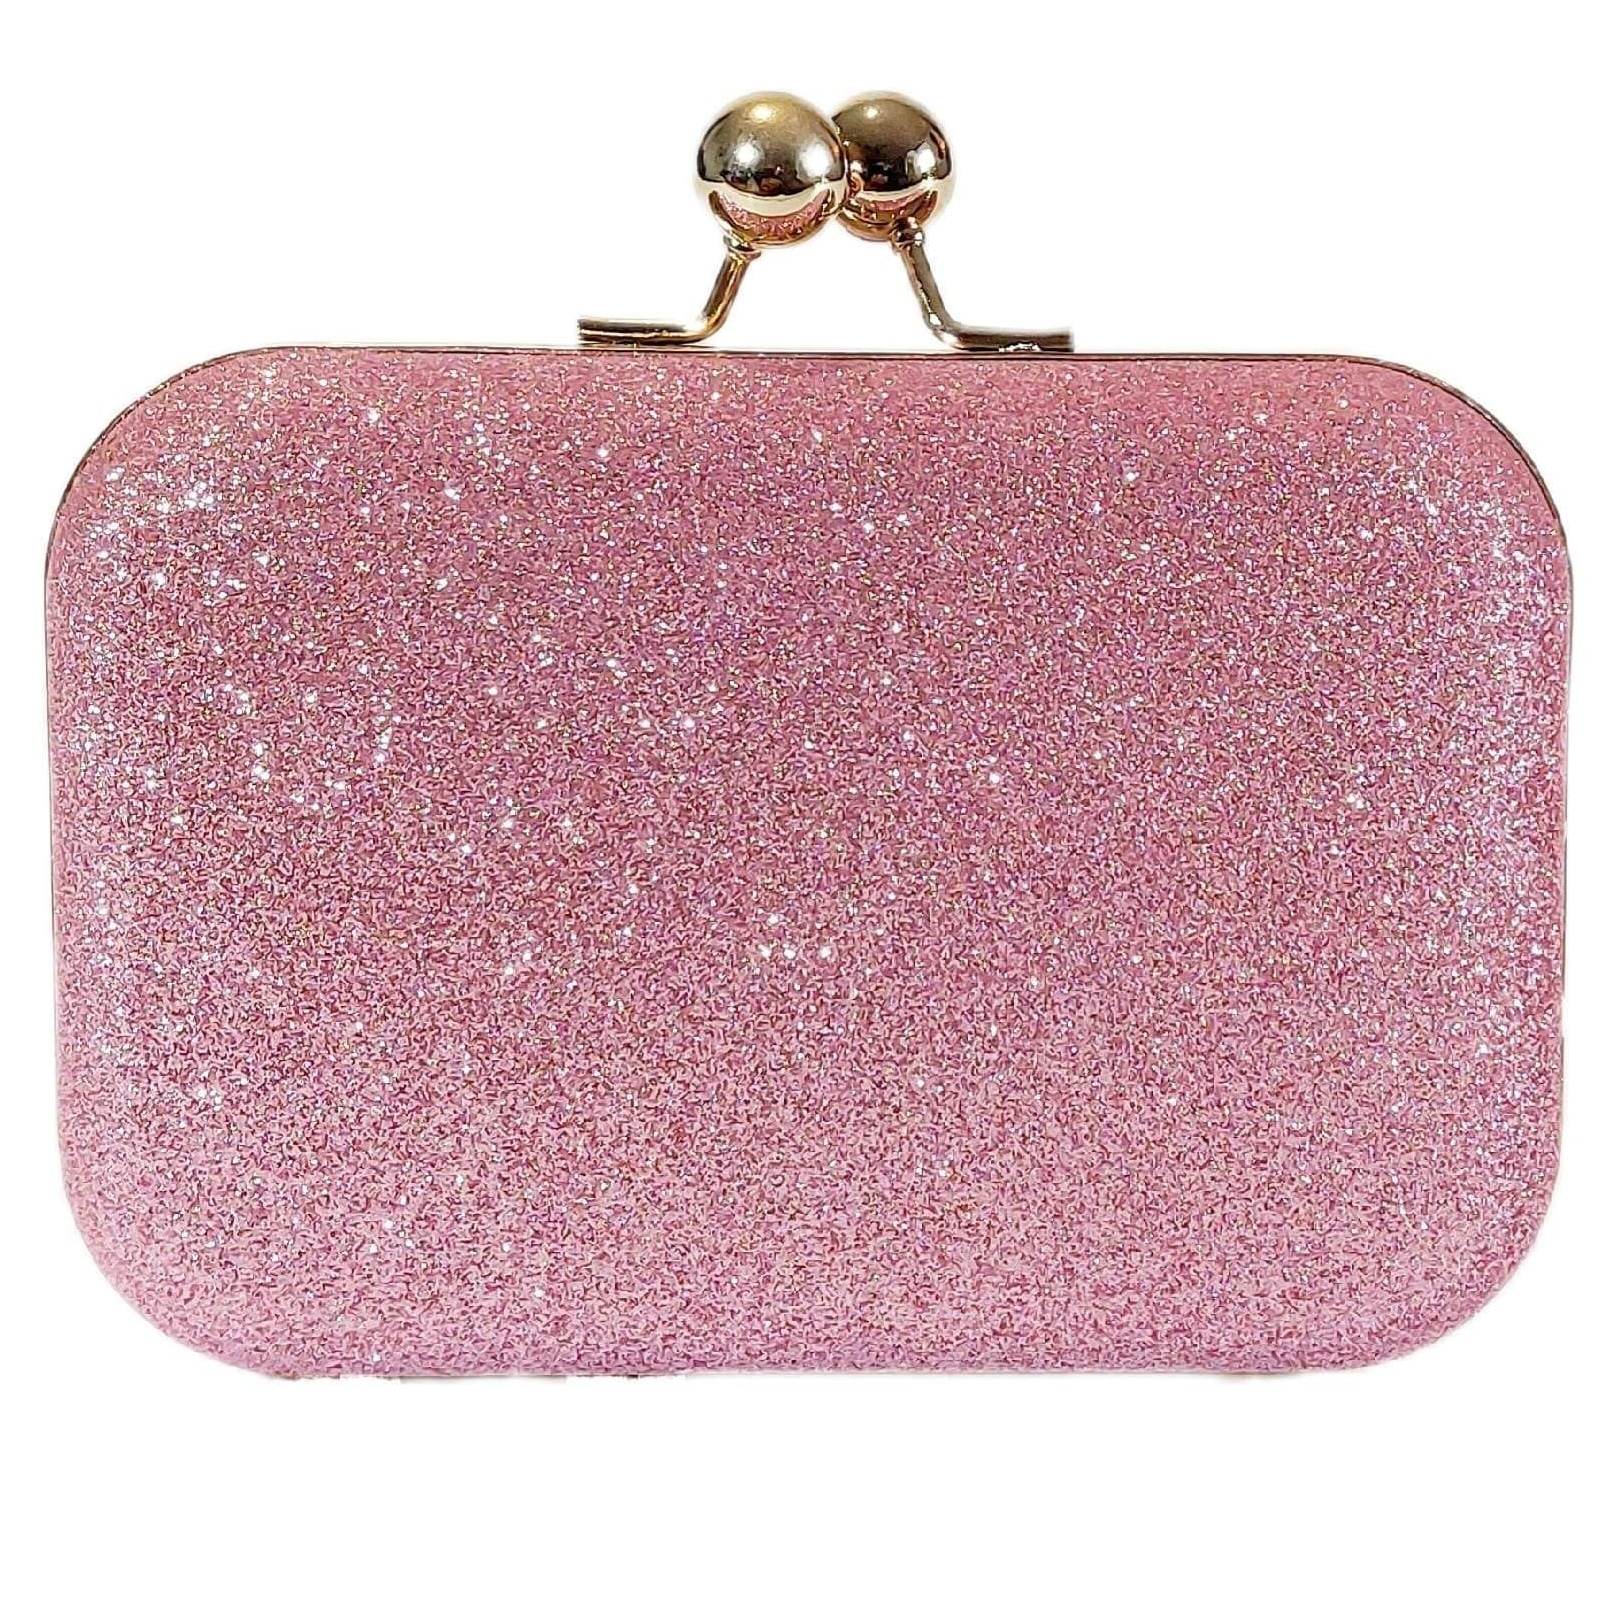 stunning pink glitter clutch from the divalicious candyland collection